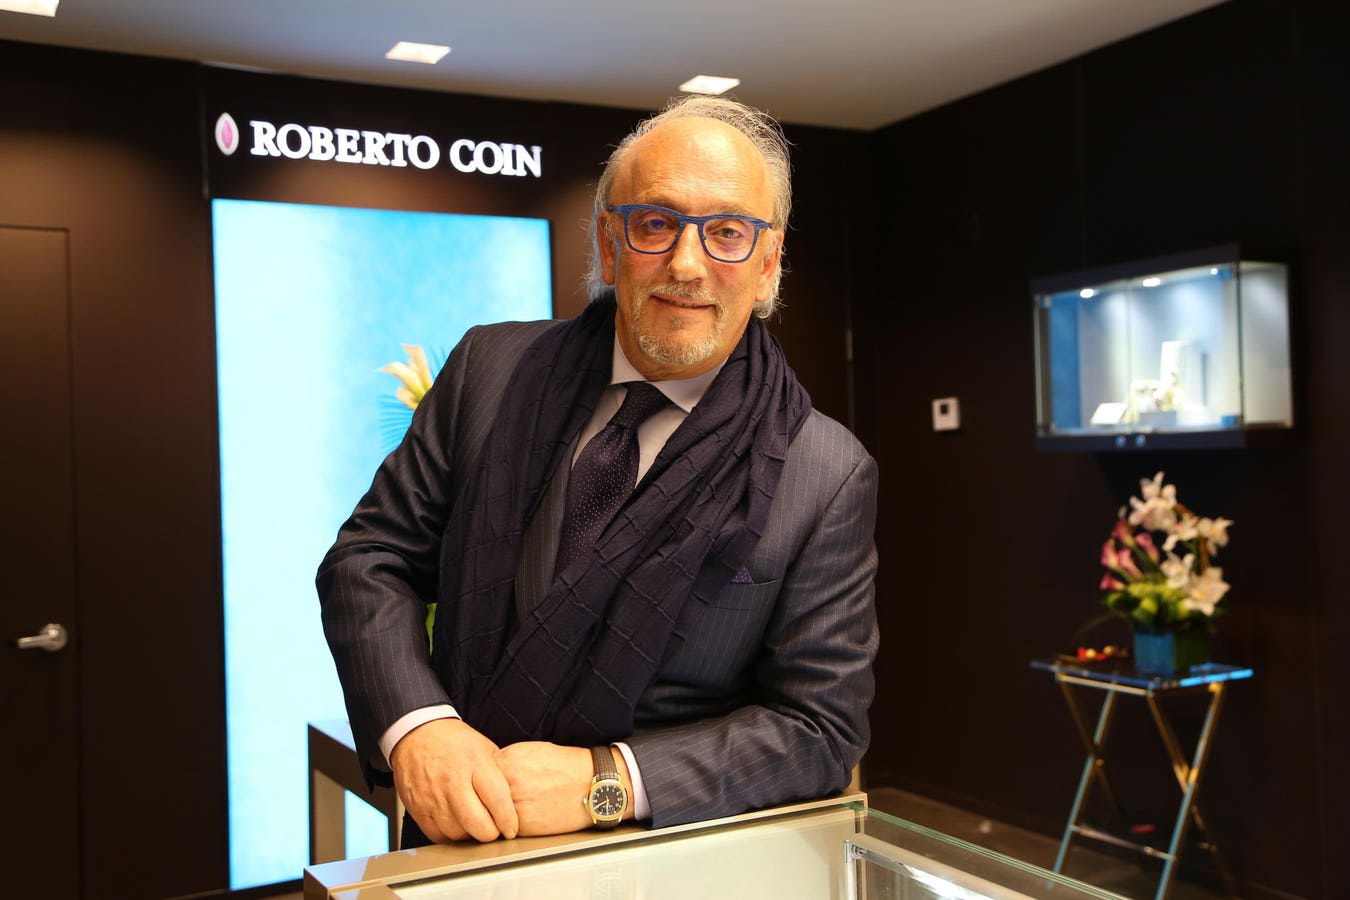 Watches Of Switzerland Buys Roberto Coin U.S. Business For $130 Million